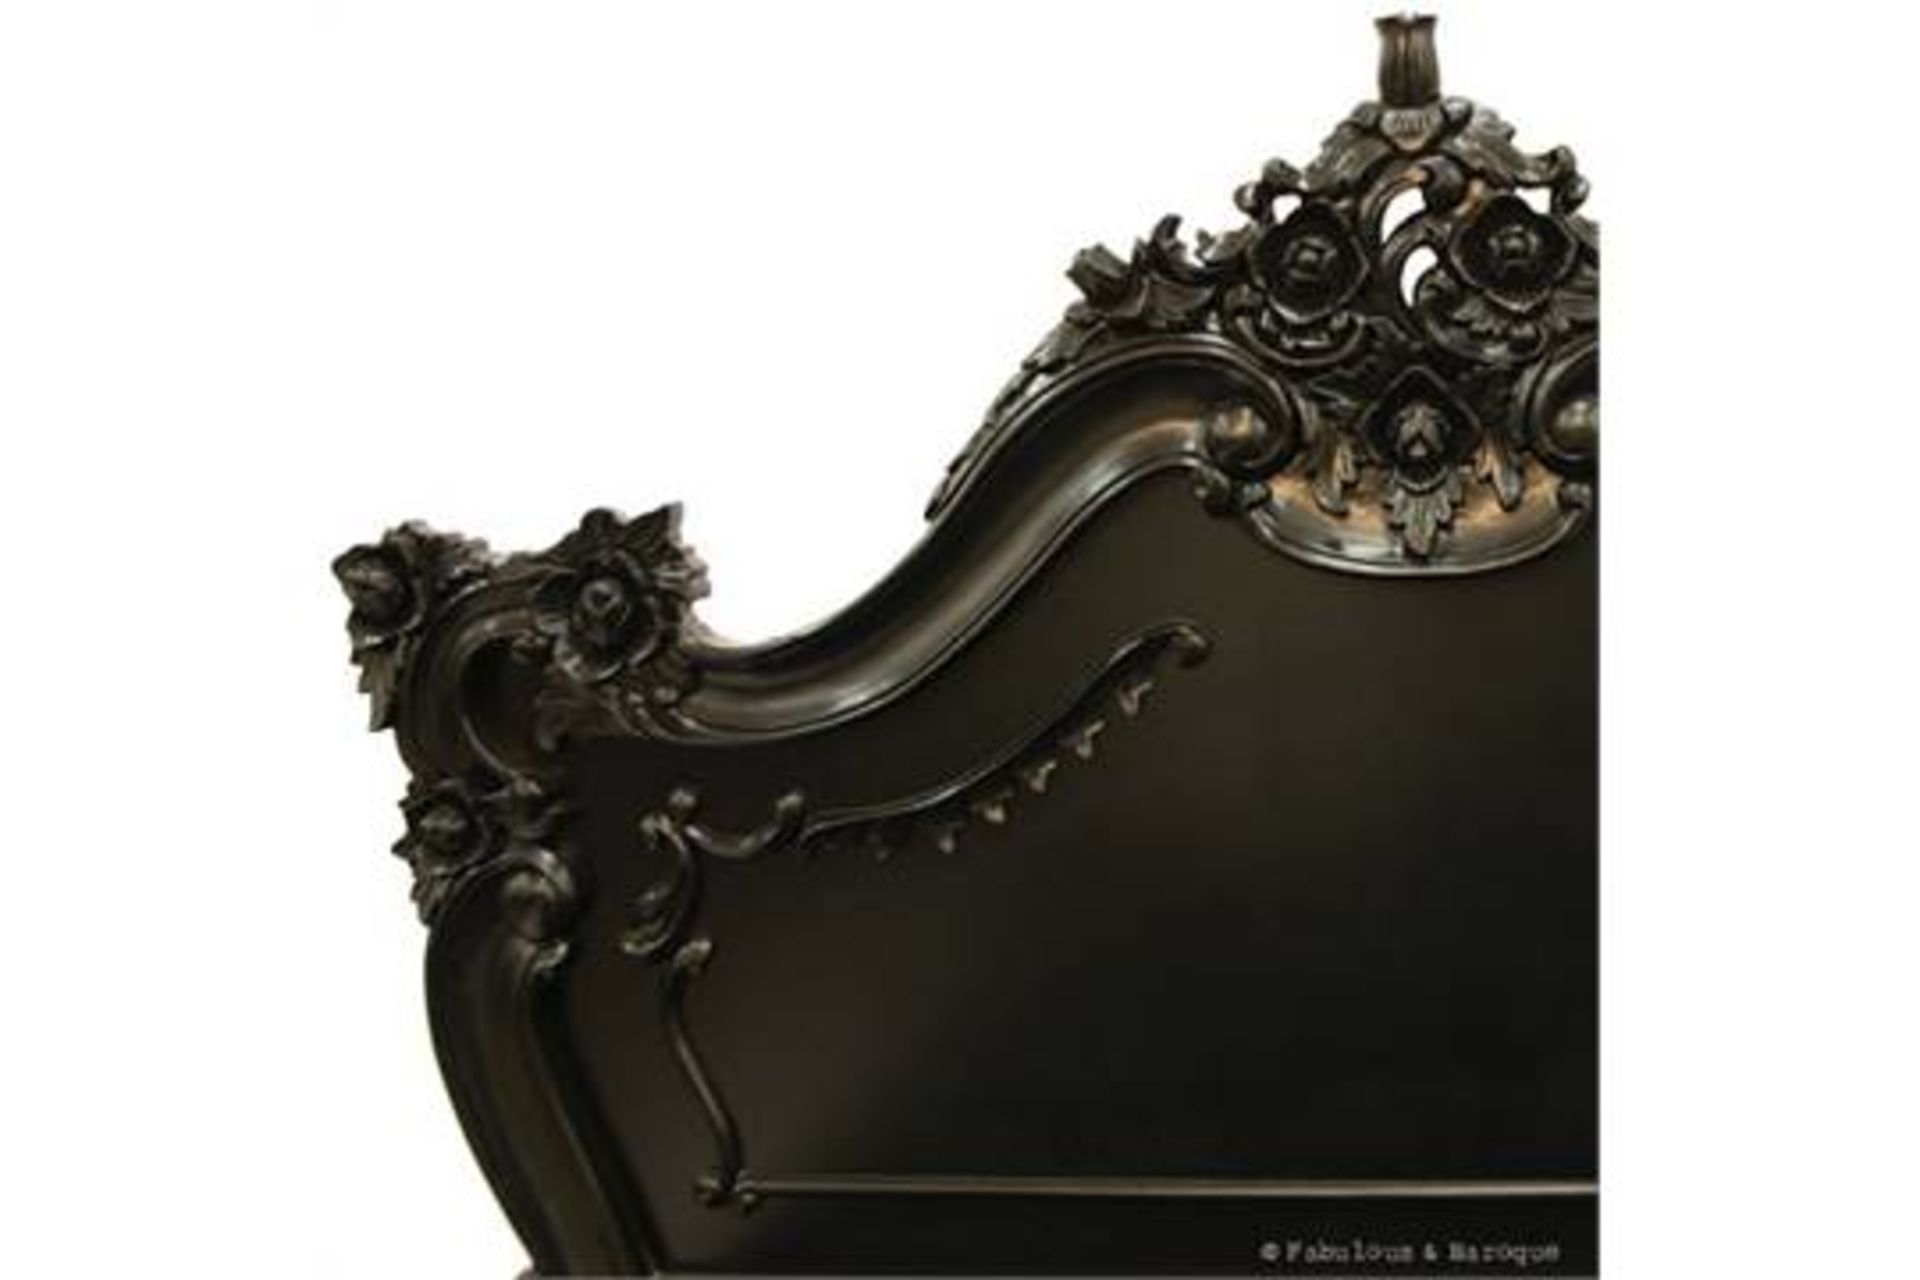 5ft  Double
Royal Fortune Montespan Bed - Black -  The Fabulous & Rococo Bed features
exaggerated - Image 6 of 6